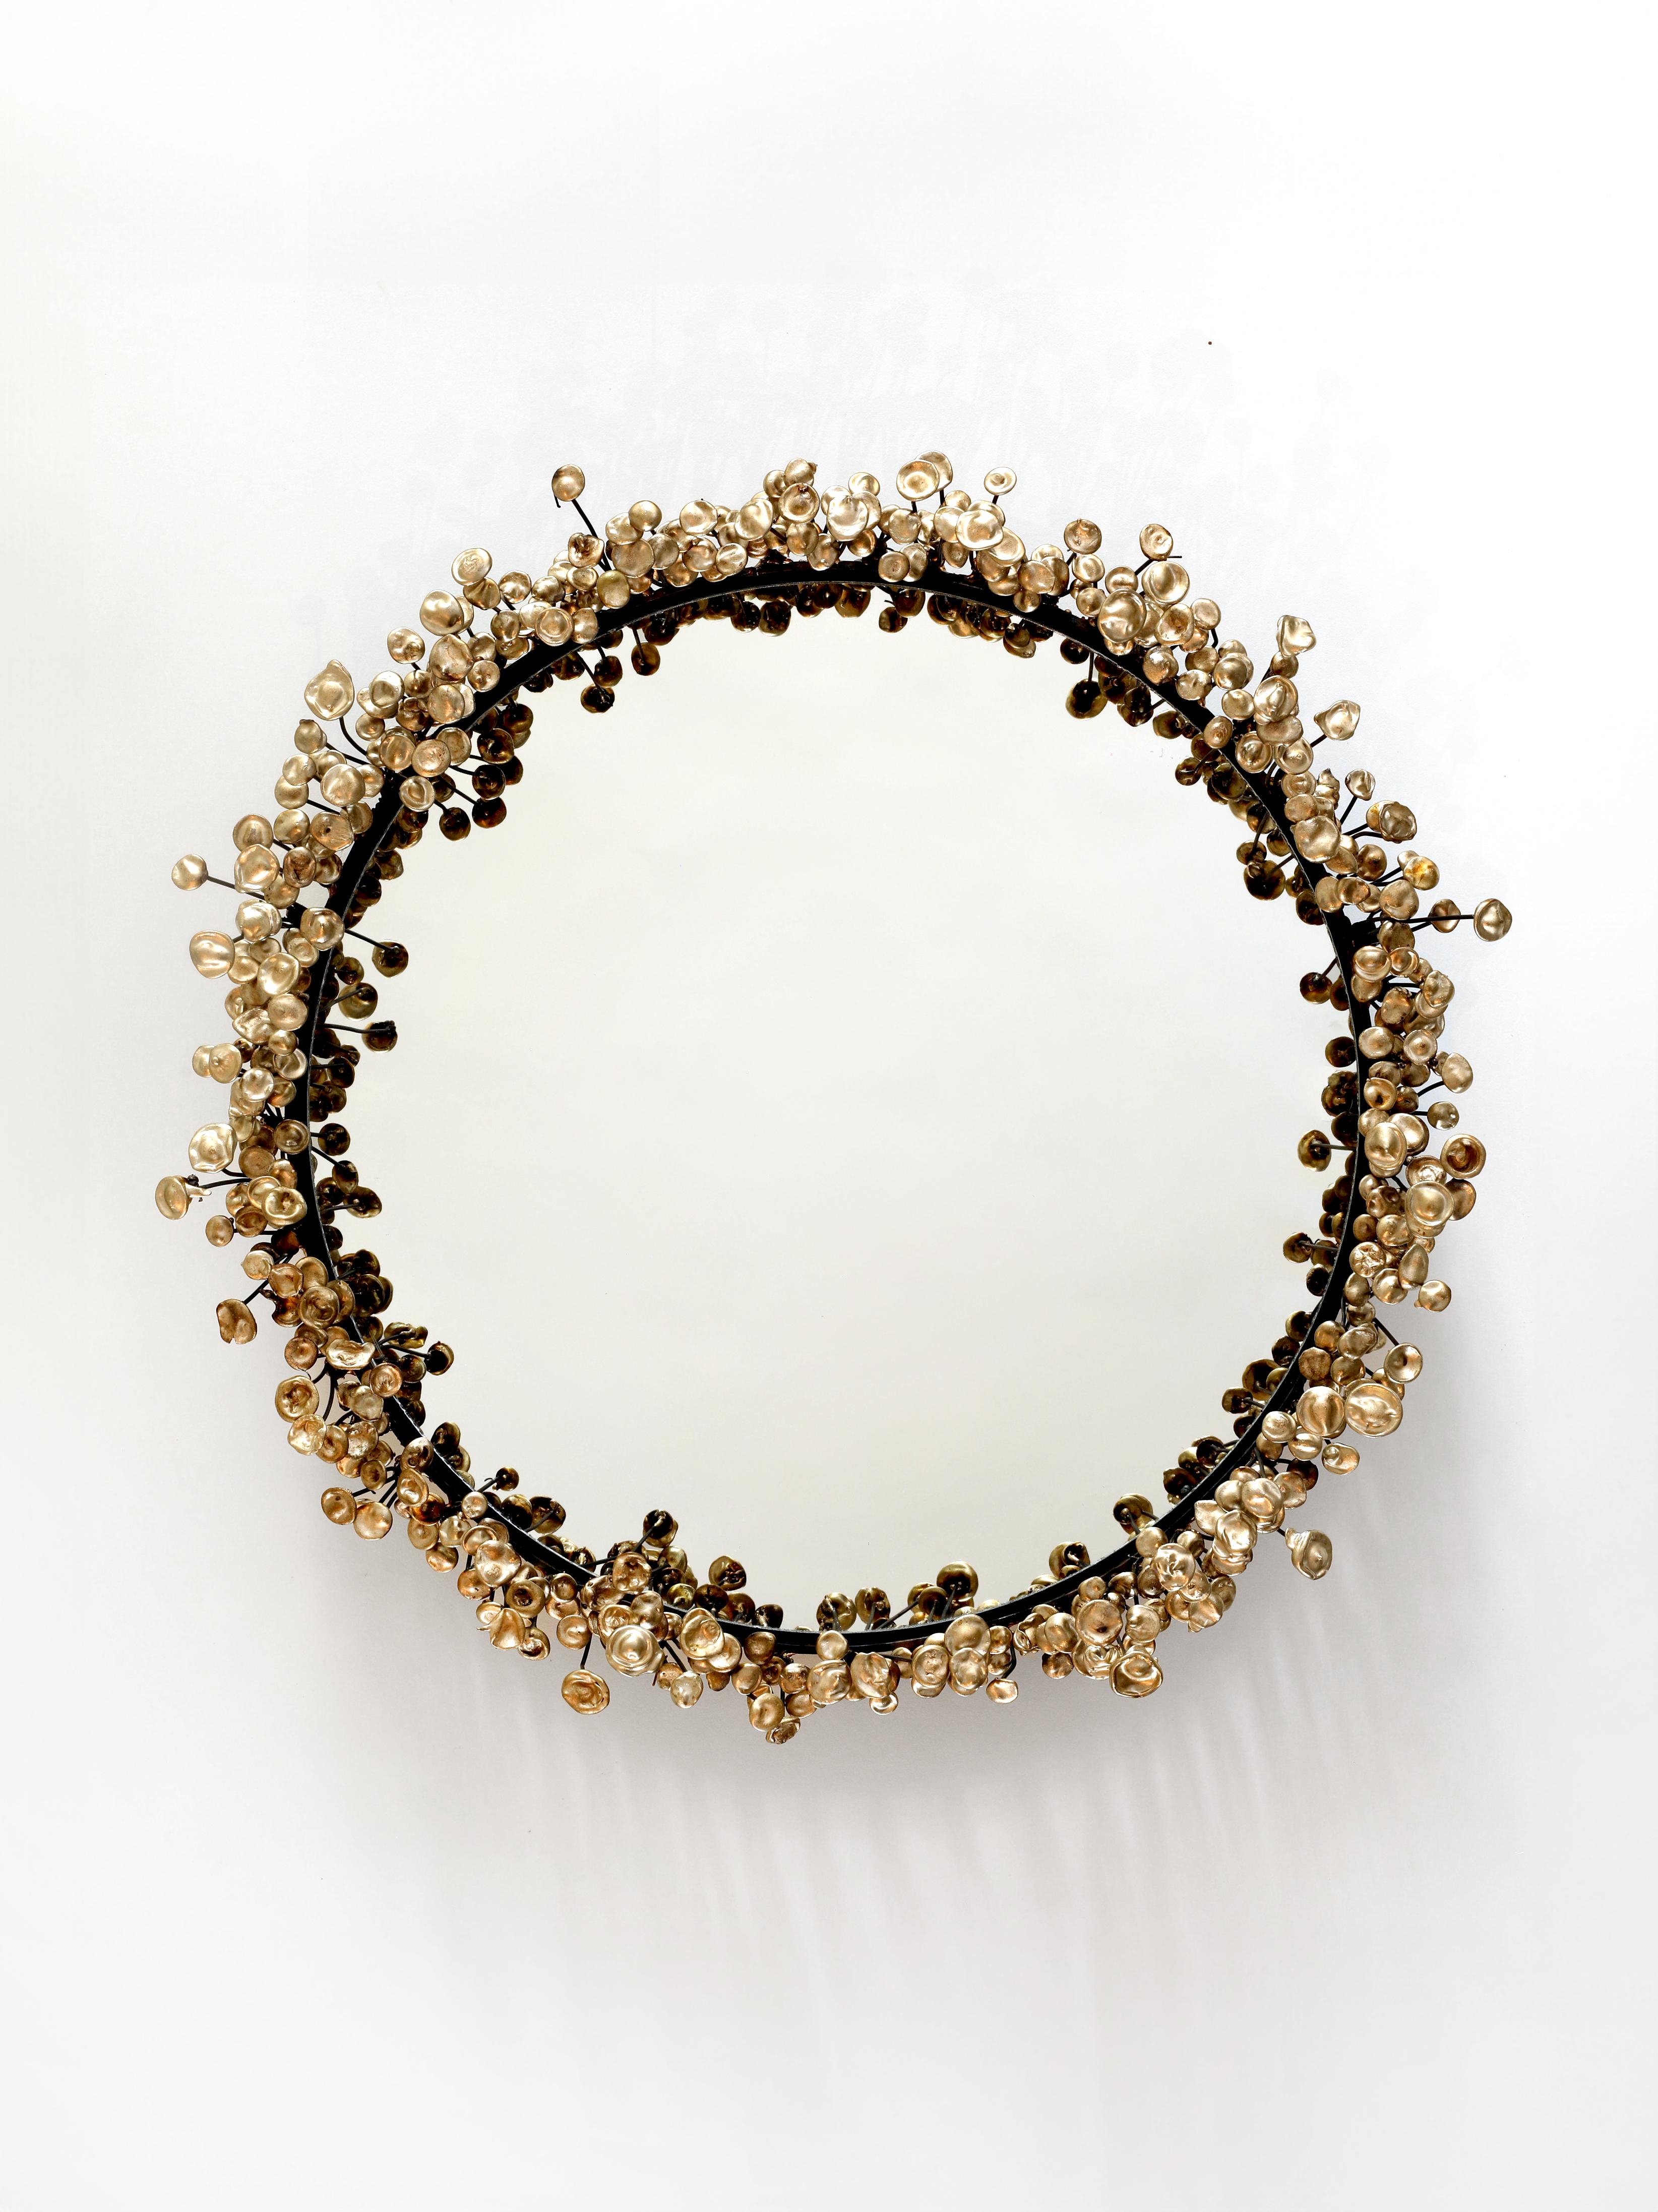 The Flower Mirror is made up of hundreds of unique bronze blossoms welded to a steel frame. Each piece is one of a kind and therefore may differ slightly from the images.